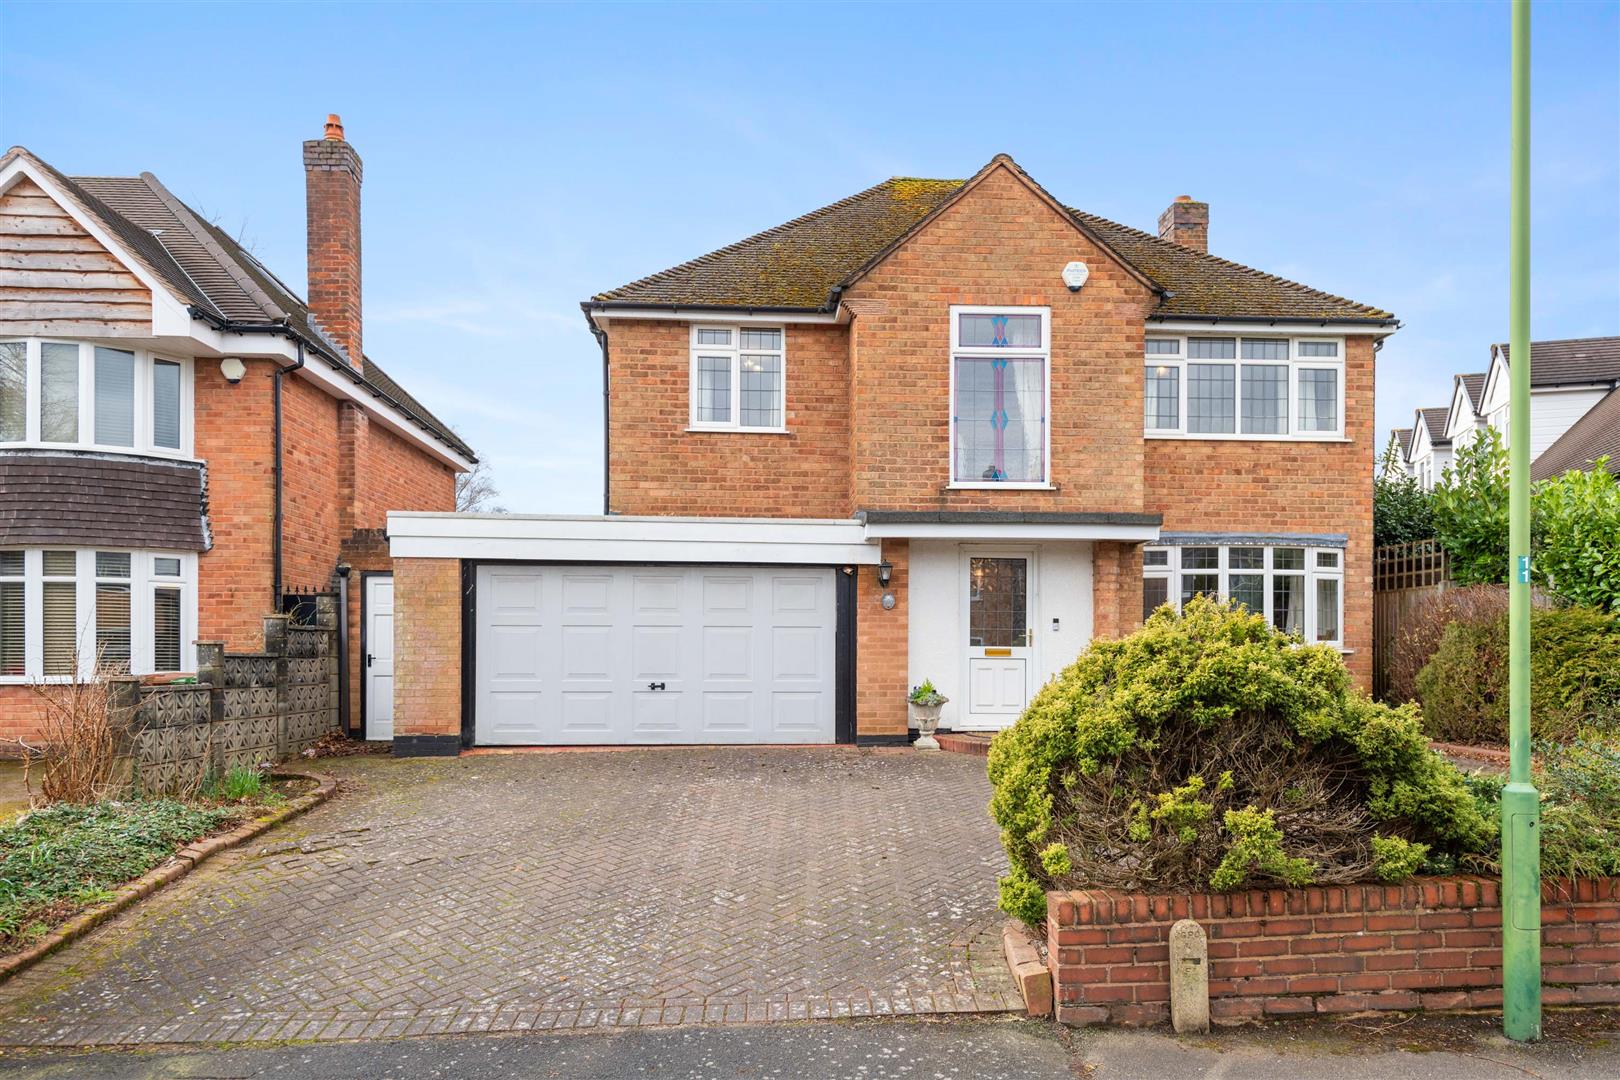 3 bed detached house for sale in Woodlea Drive, Solihull  - Property Image 1